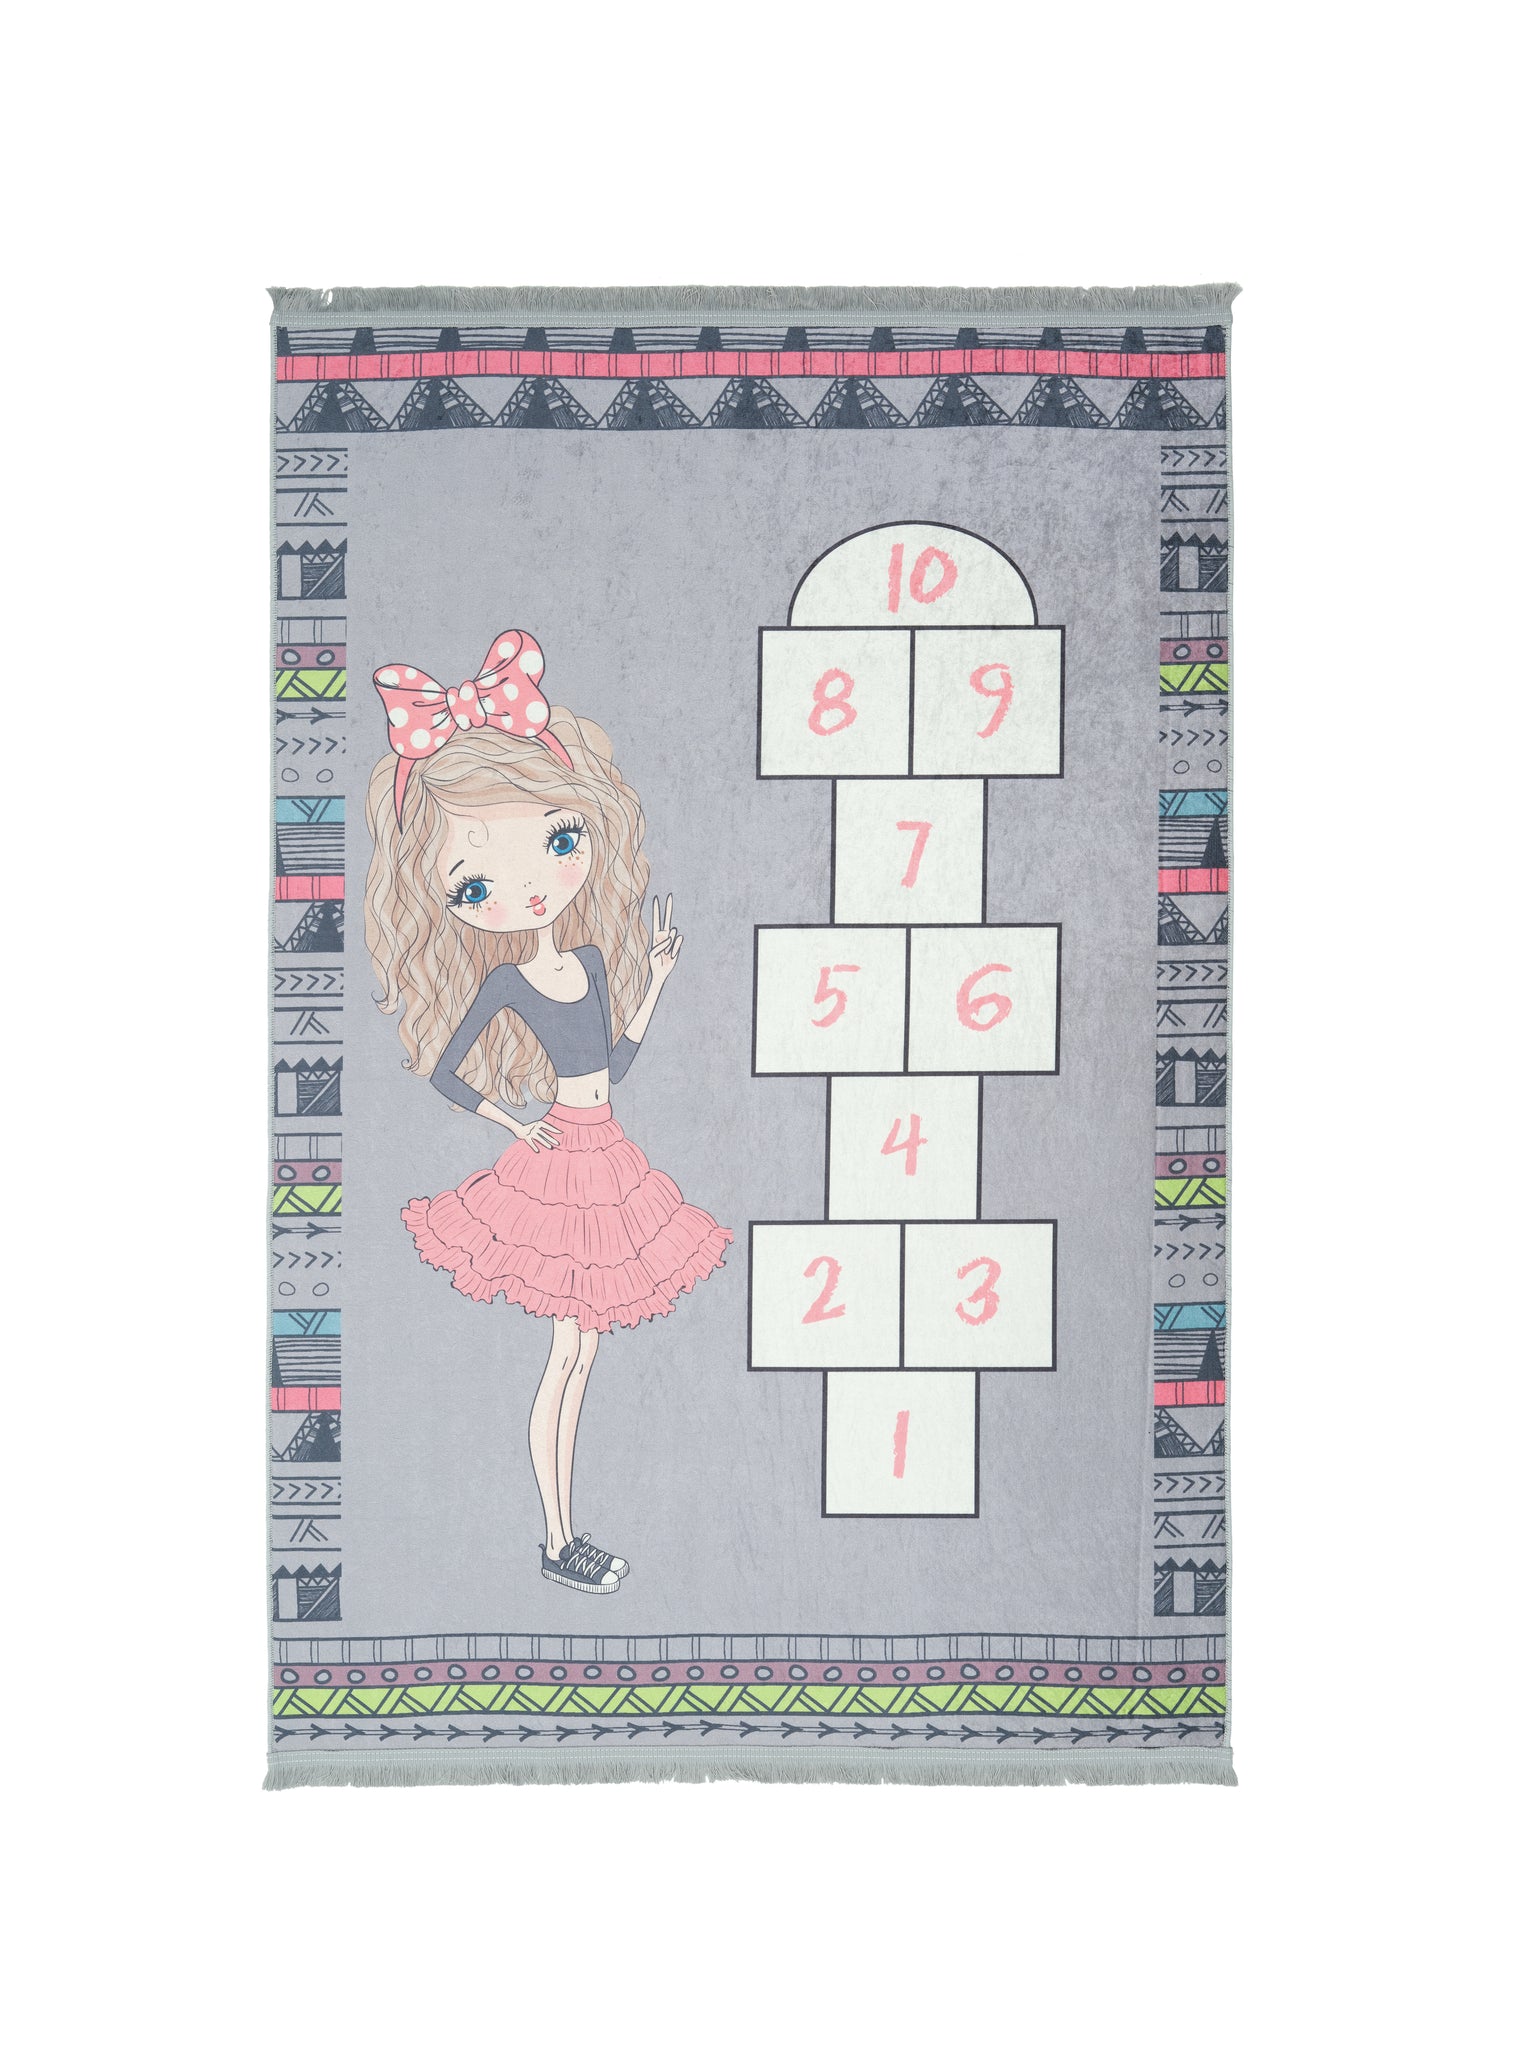 Rugaroos Hoppy Scotch Kid's Machine Washable Play Rug | White Hopscotch board with Pink numbers with cartoon girl and fun boarder | 4x6 | Mother Ruggers | Washable Rugs | Kid's Rugs | Eco Friendly Rug| Pet Friendly | Kid Friendly | Machine Wash | Line Dry | Bedroom | High-Traffic | Two-year warranty with proper care | Shake or light Vacuum | Machine Wash as needed | Dry Flat or Line Dry | Dries fast | Hand Drawn - Digitally Printed | Velvet | Easy- Clean